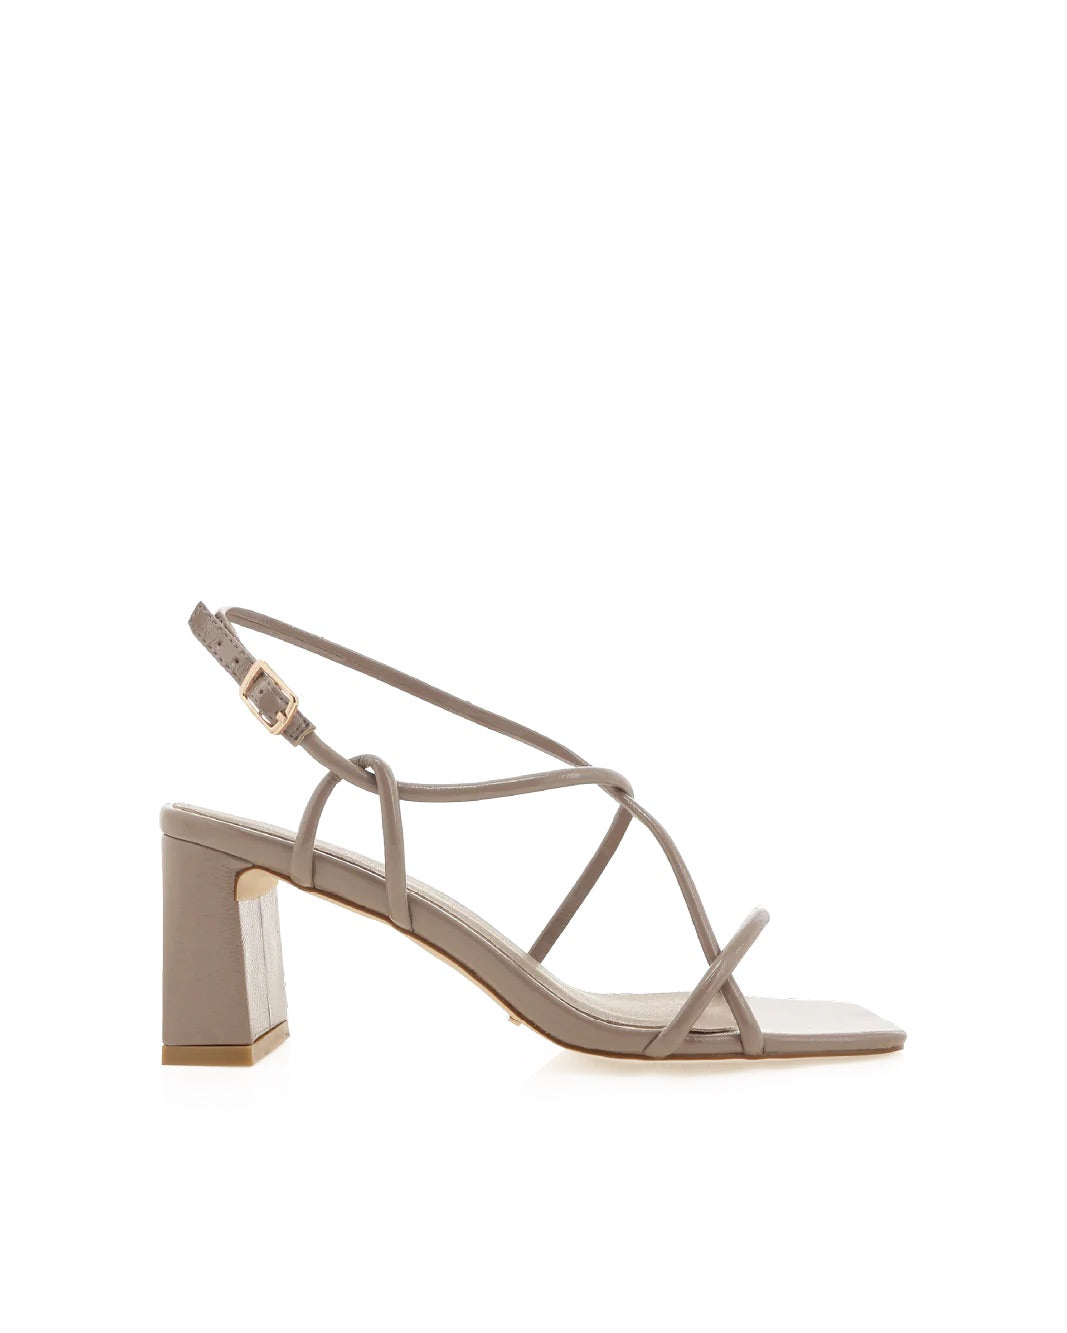 Iriana by Billini is a classic strappy slingback heel.. An elegant strappy block heel to take you from day-to-night.